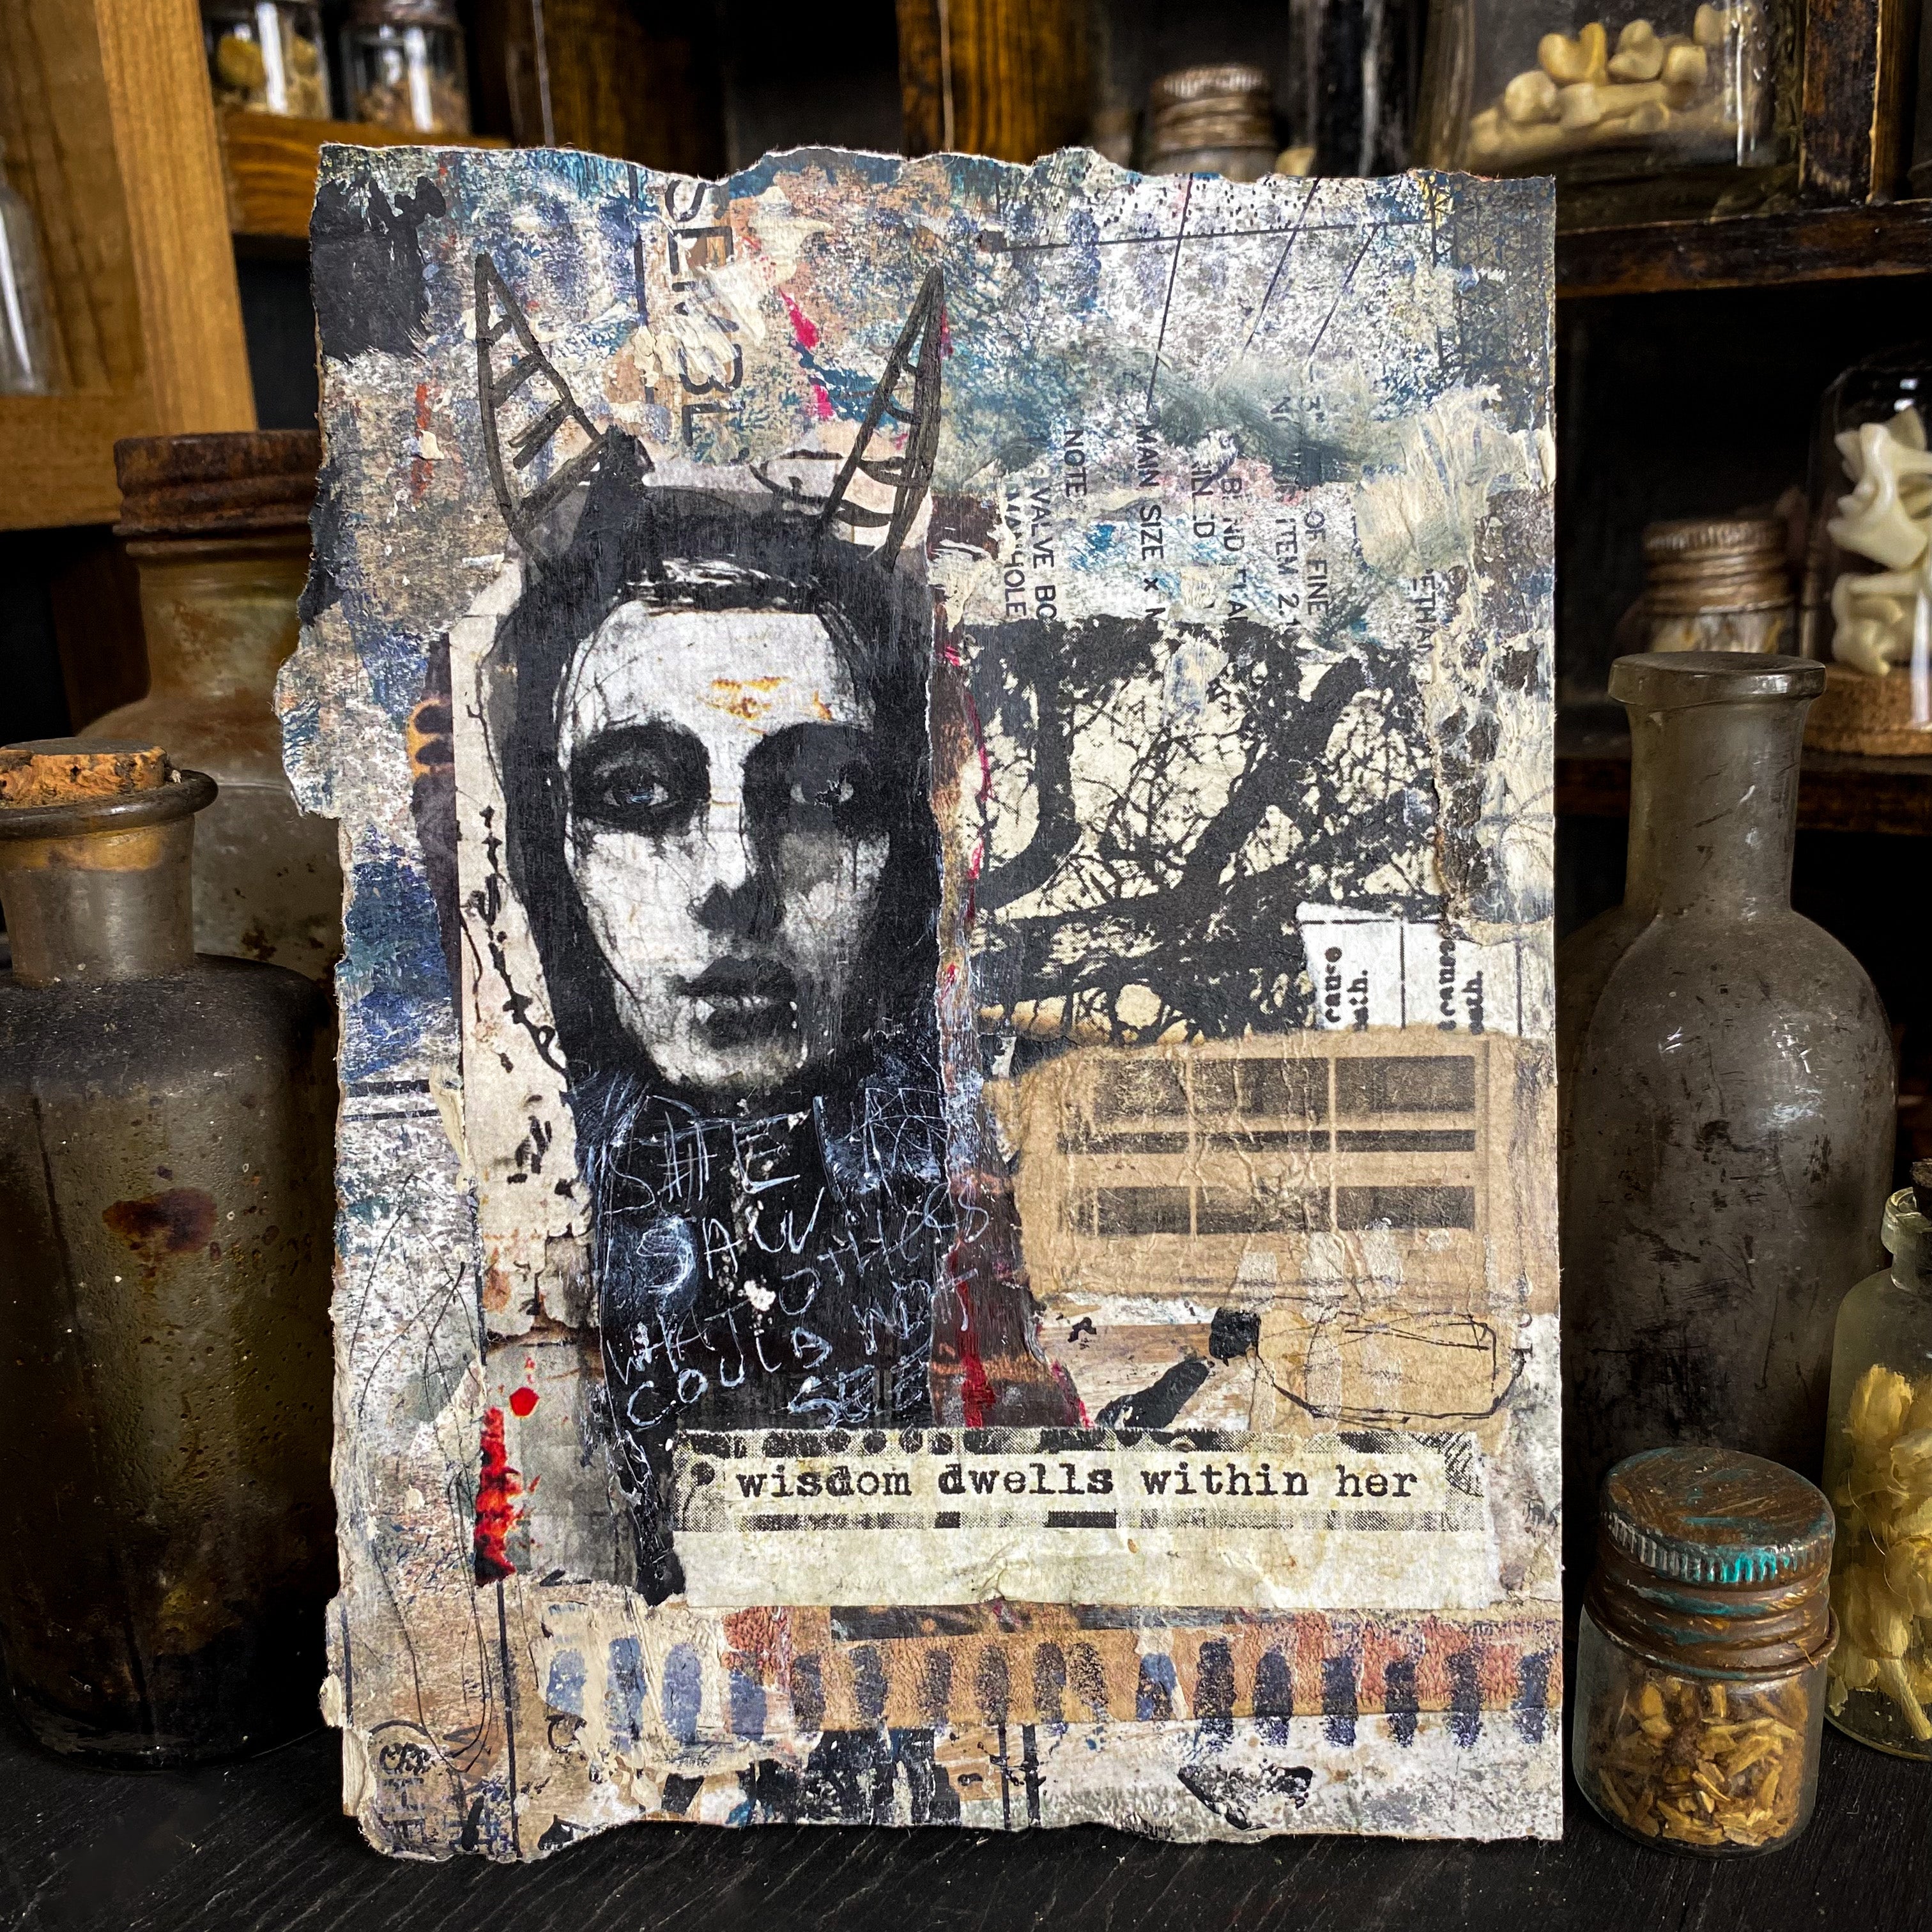 Wisdom Dwells Within Her - Original Mixed Media Collage